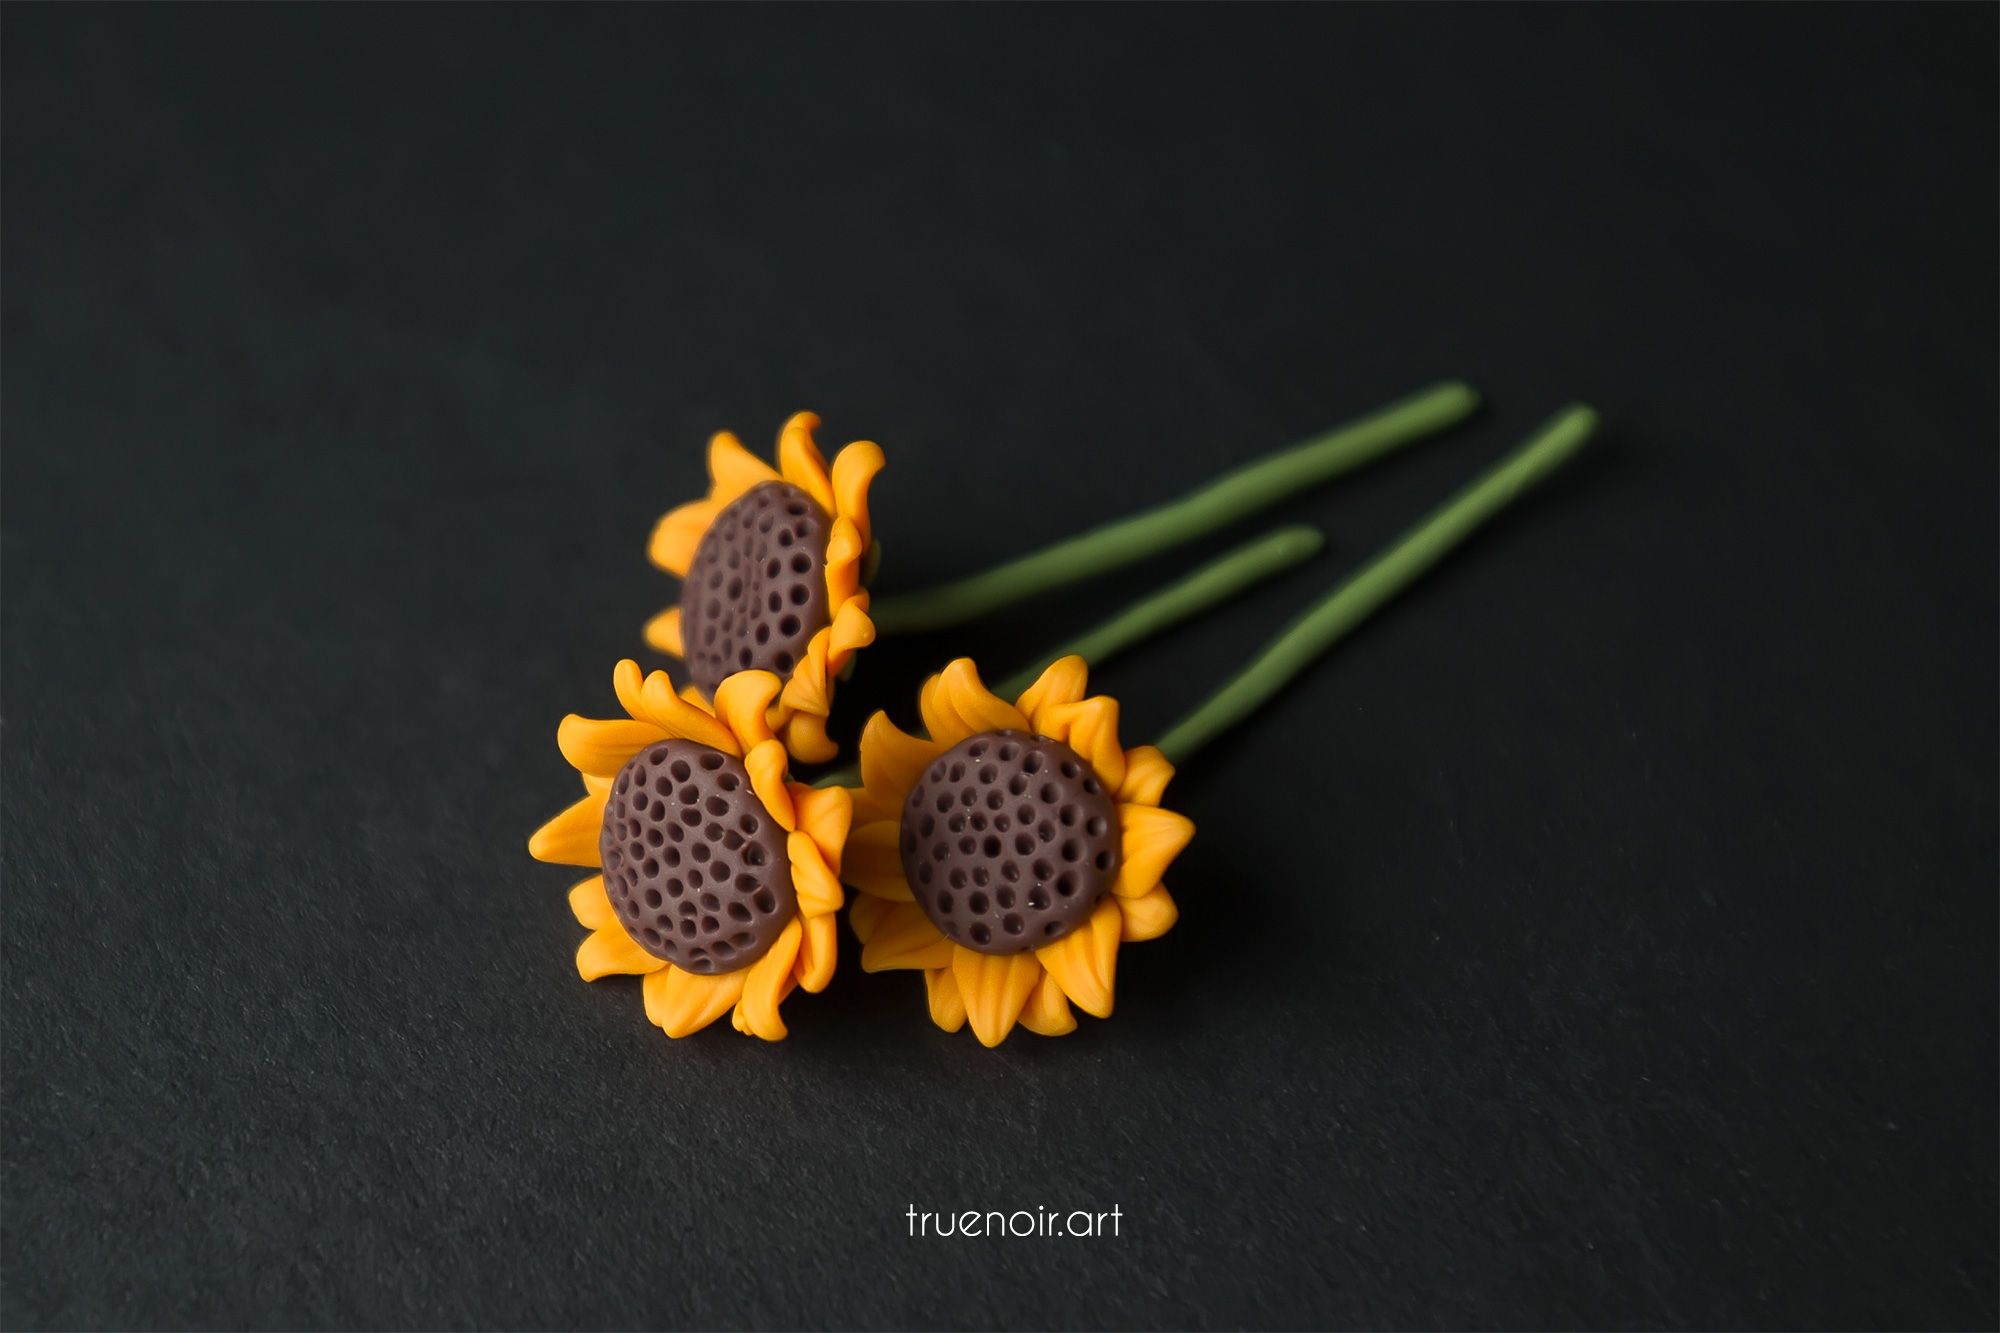 Three polymer clay figurines of miniature sunflowers against a black background